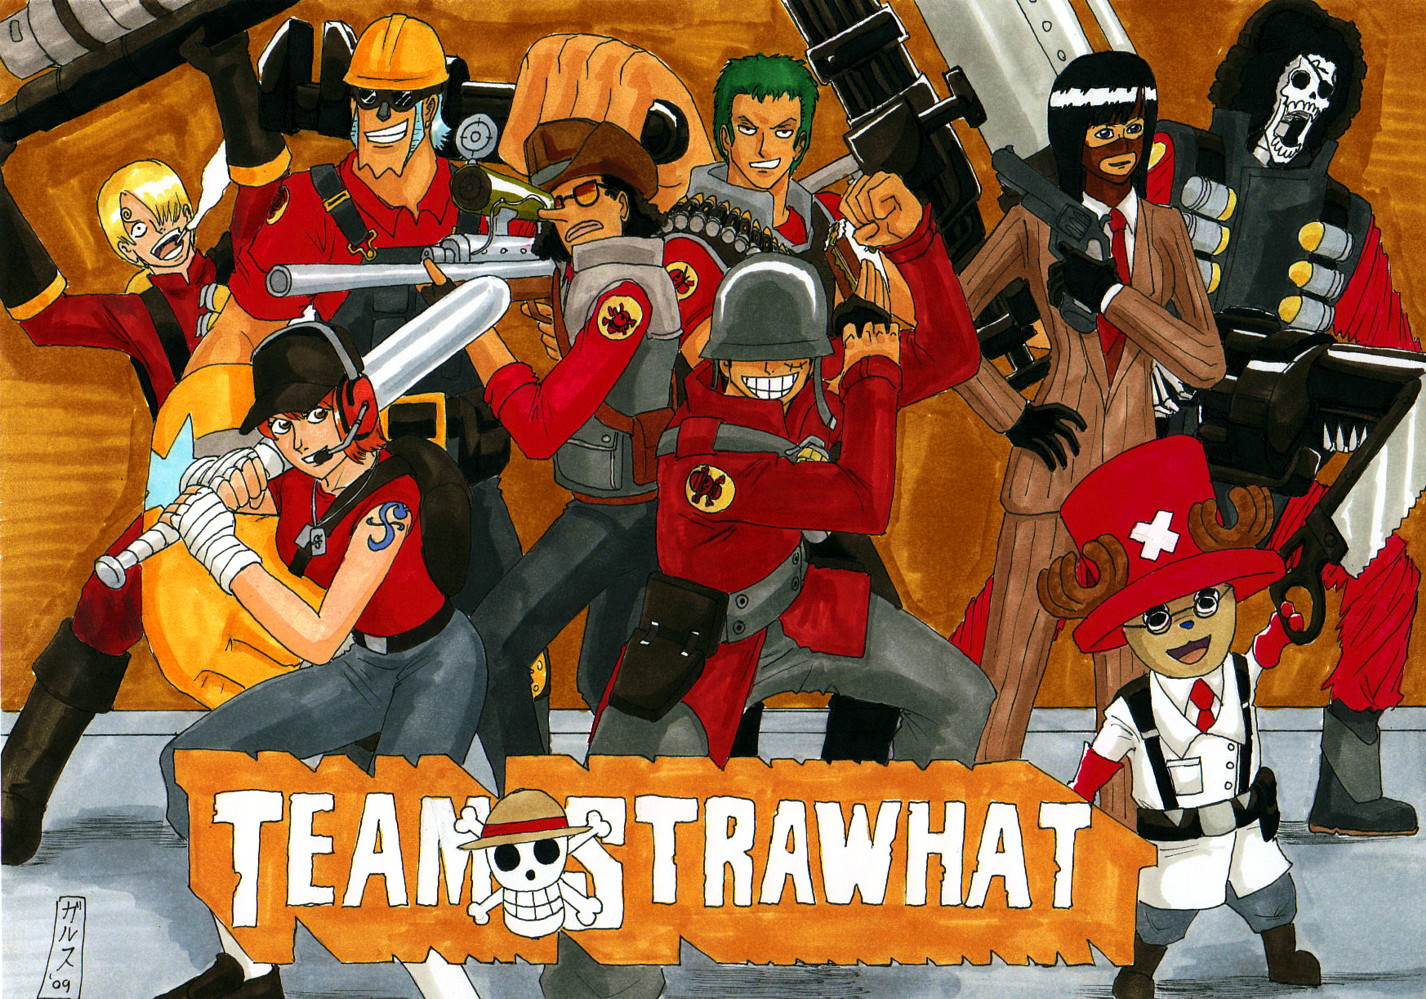 Meet_the_Strawhats_by_G0069.jpg